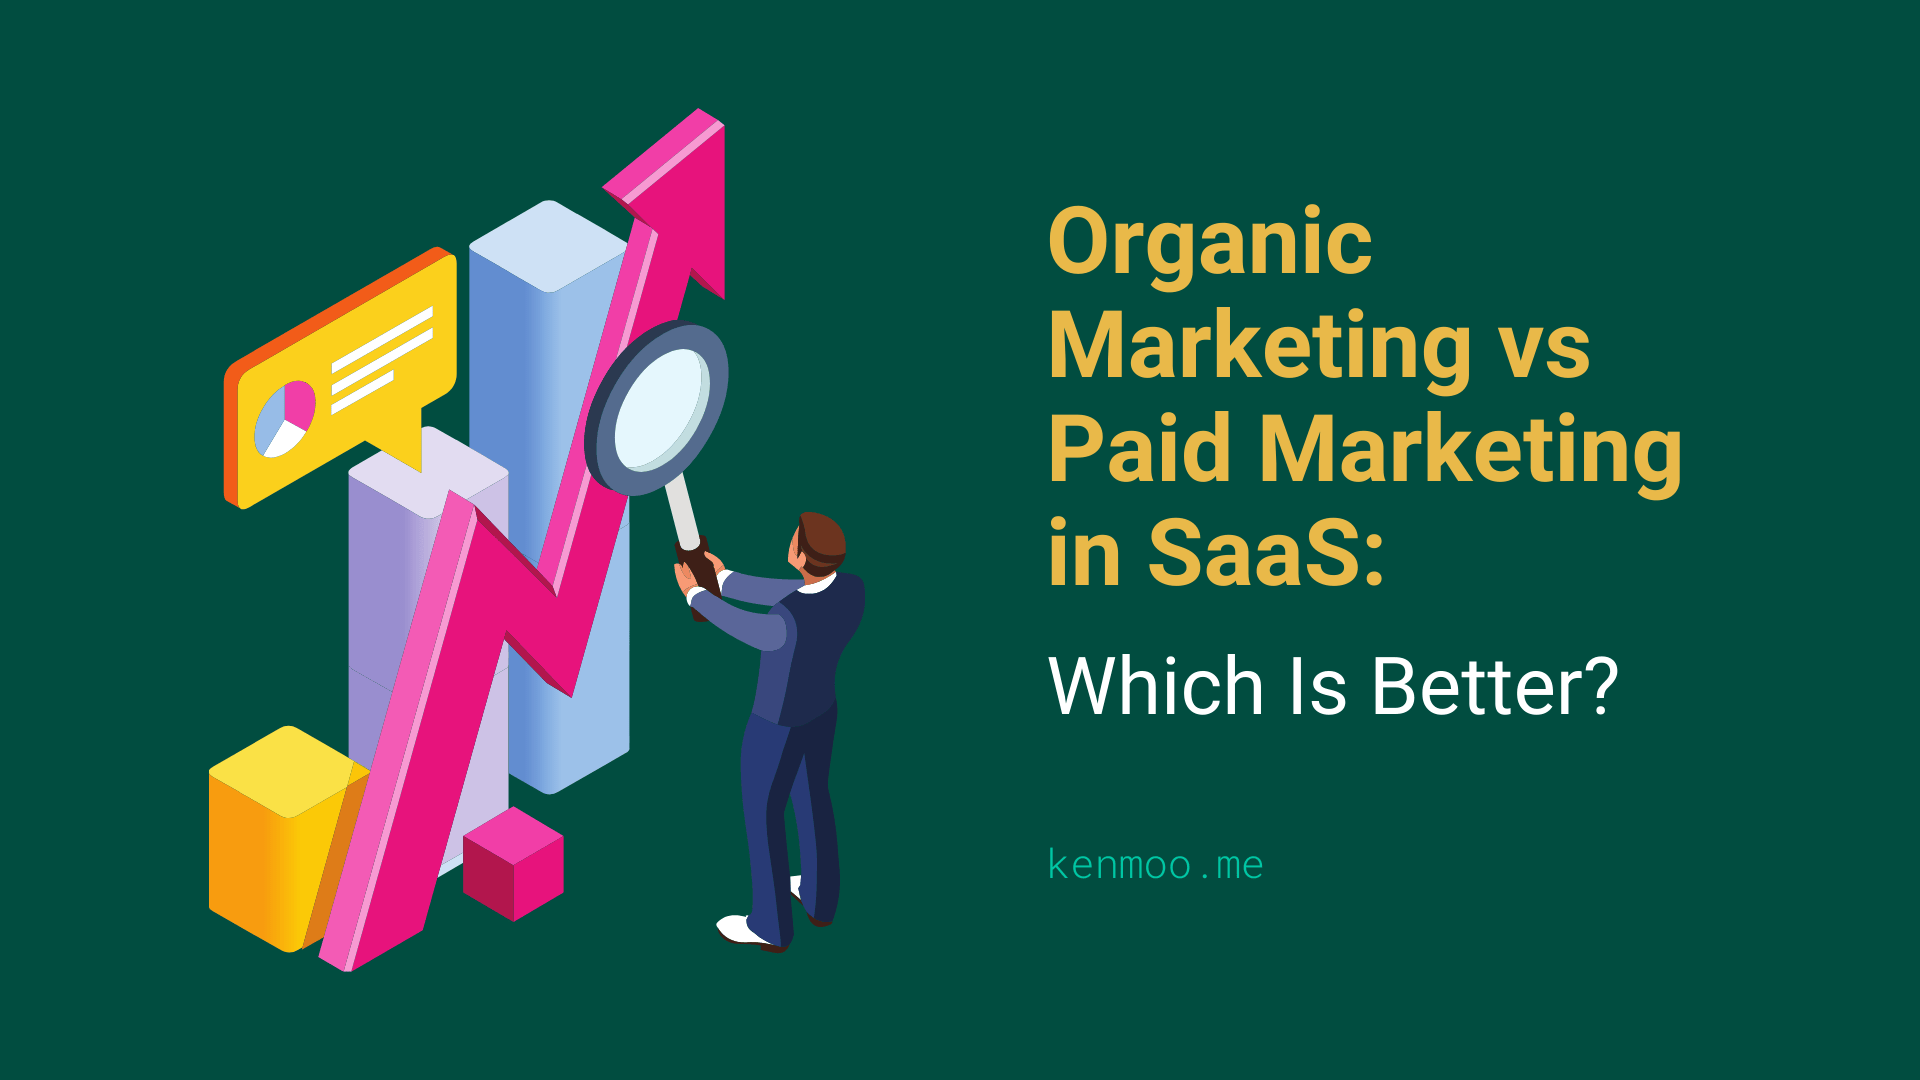 Organic Marketing vs Paid Marketing in SaaS: Which is Better?